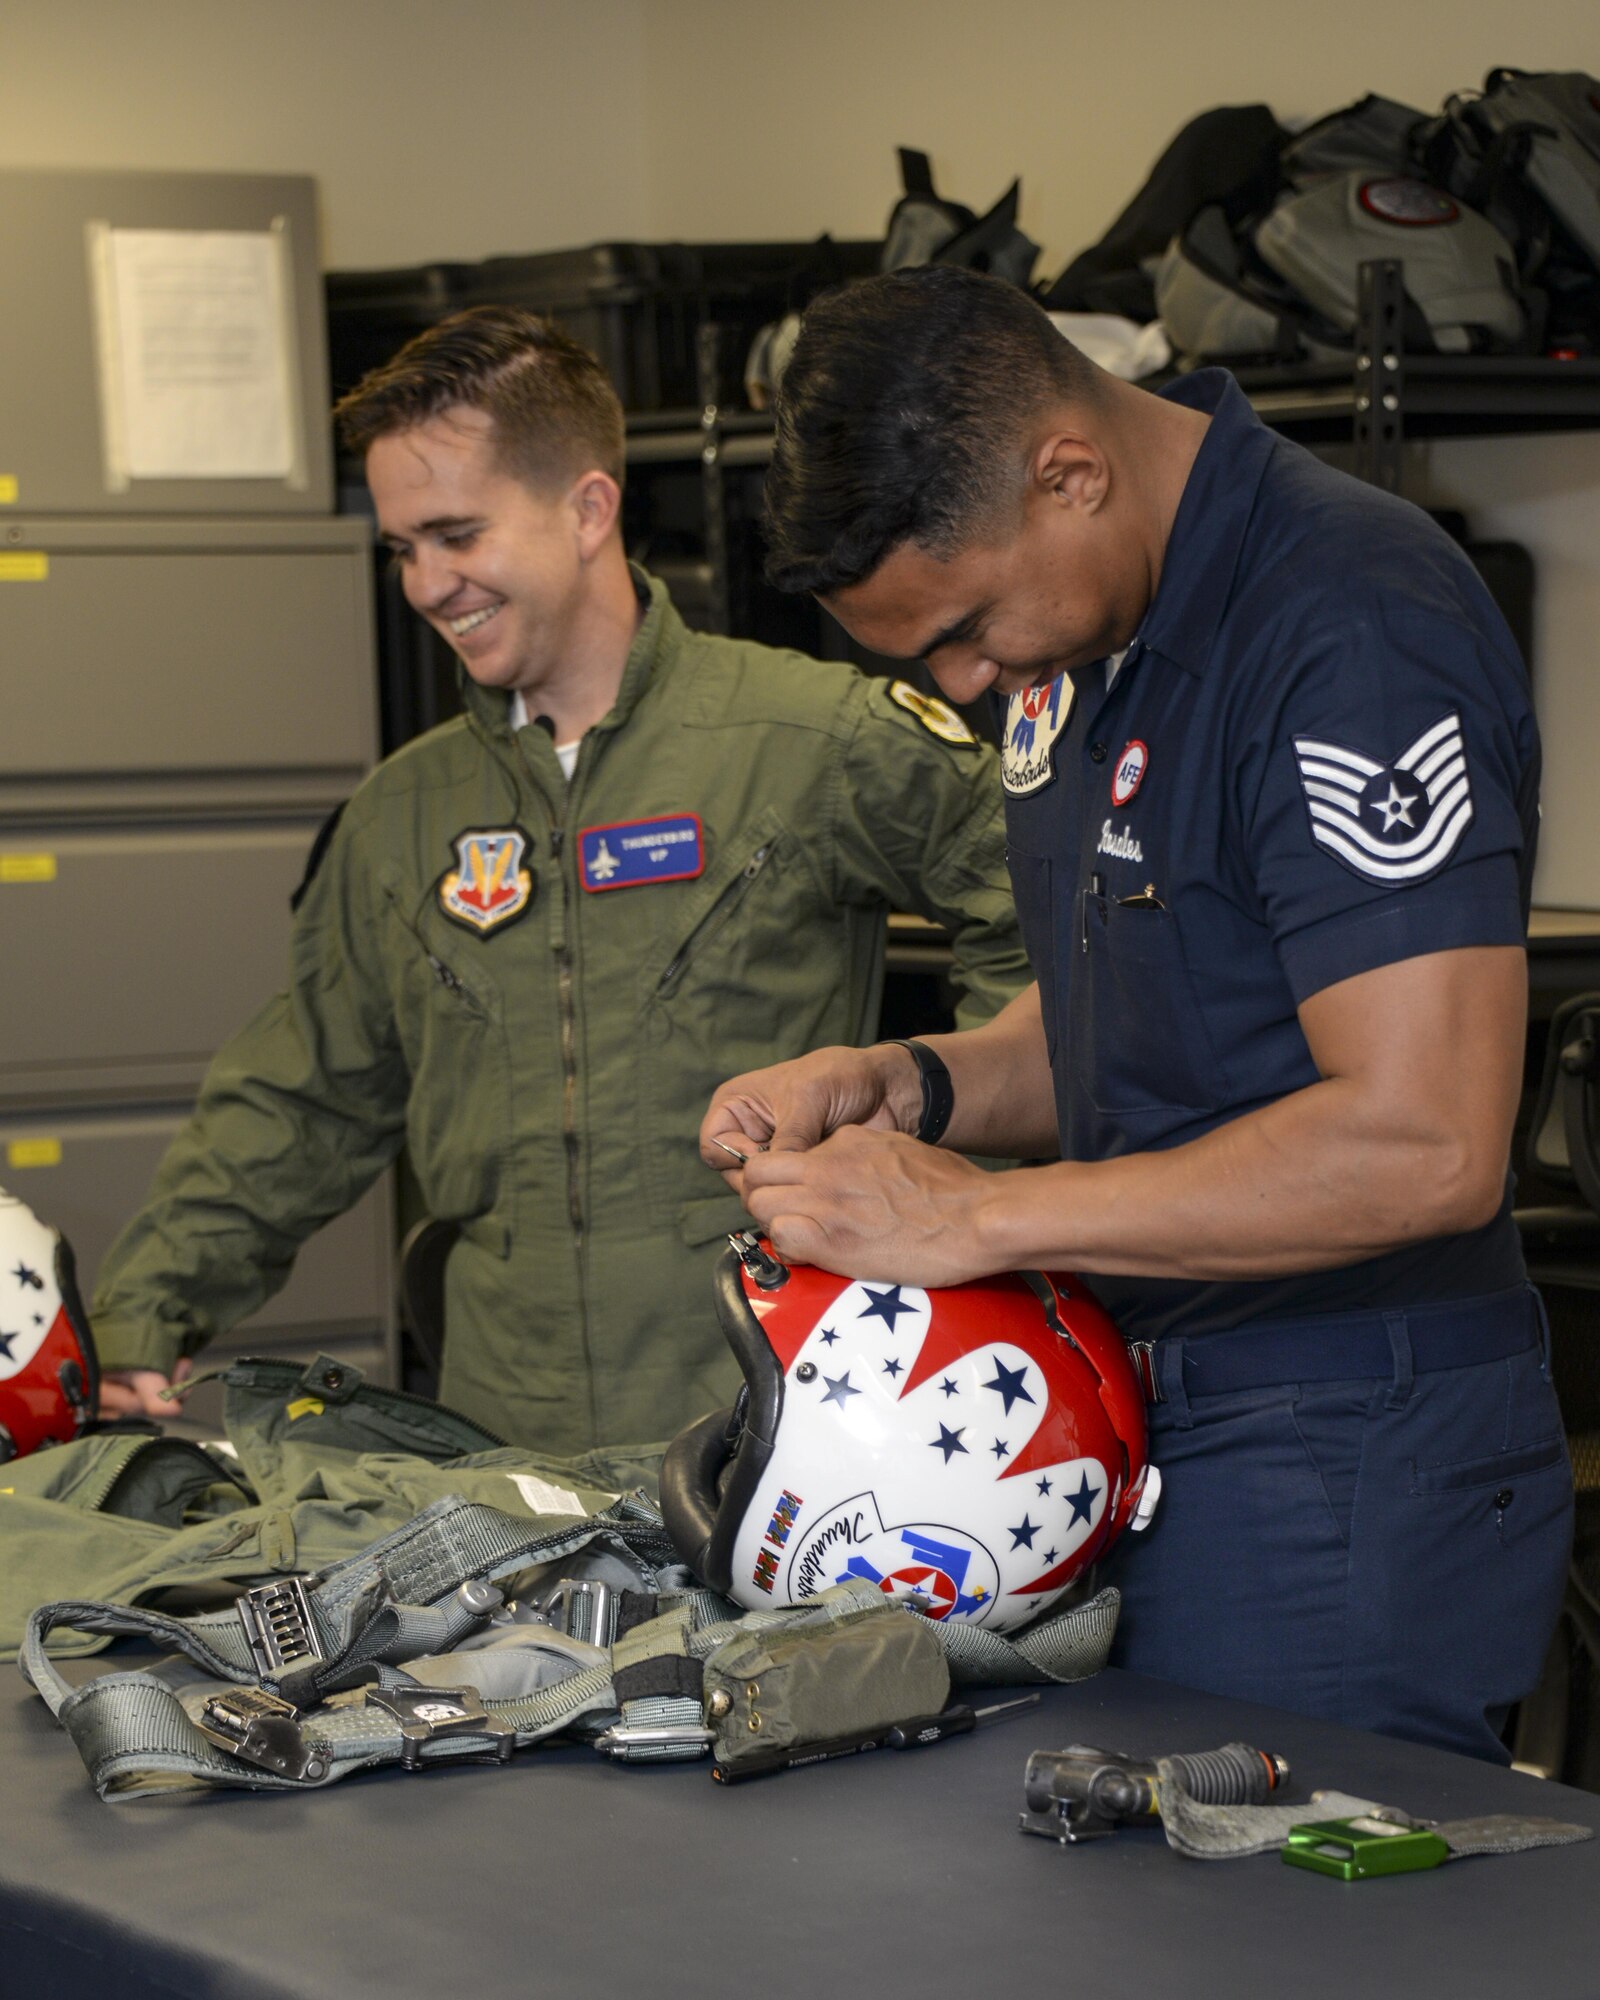 U.S. Air Force Tech. Sgt. Paul Rosales, aircrew flight equipment specialist with the U.S. Air Force Air Demonstration Squadron, right, shares a laugh with Brendan Lyons, Tucson community hometown hero, as he adjusts the fit of a helmet at Davis-Monthan Air Force Base, Ariz., March 11, 2016.  Lyons was nominated as a hometown hero to fly with the Thunderbirds because of his commitment to safety and his passion to make Tucson a safer community for cyclists and motorists.  (U.S. Air Force photo by Senior Airman Chris Massey/Released)